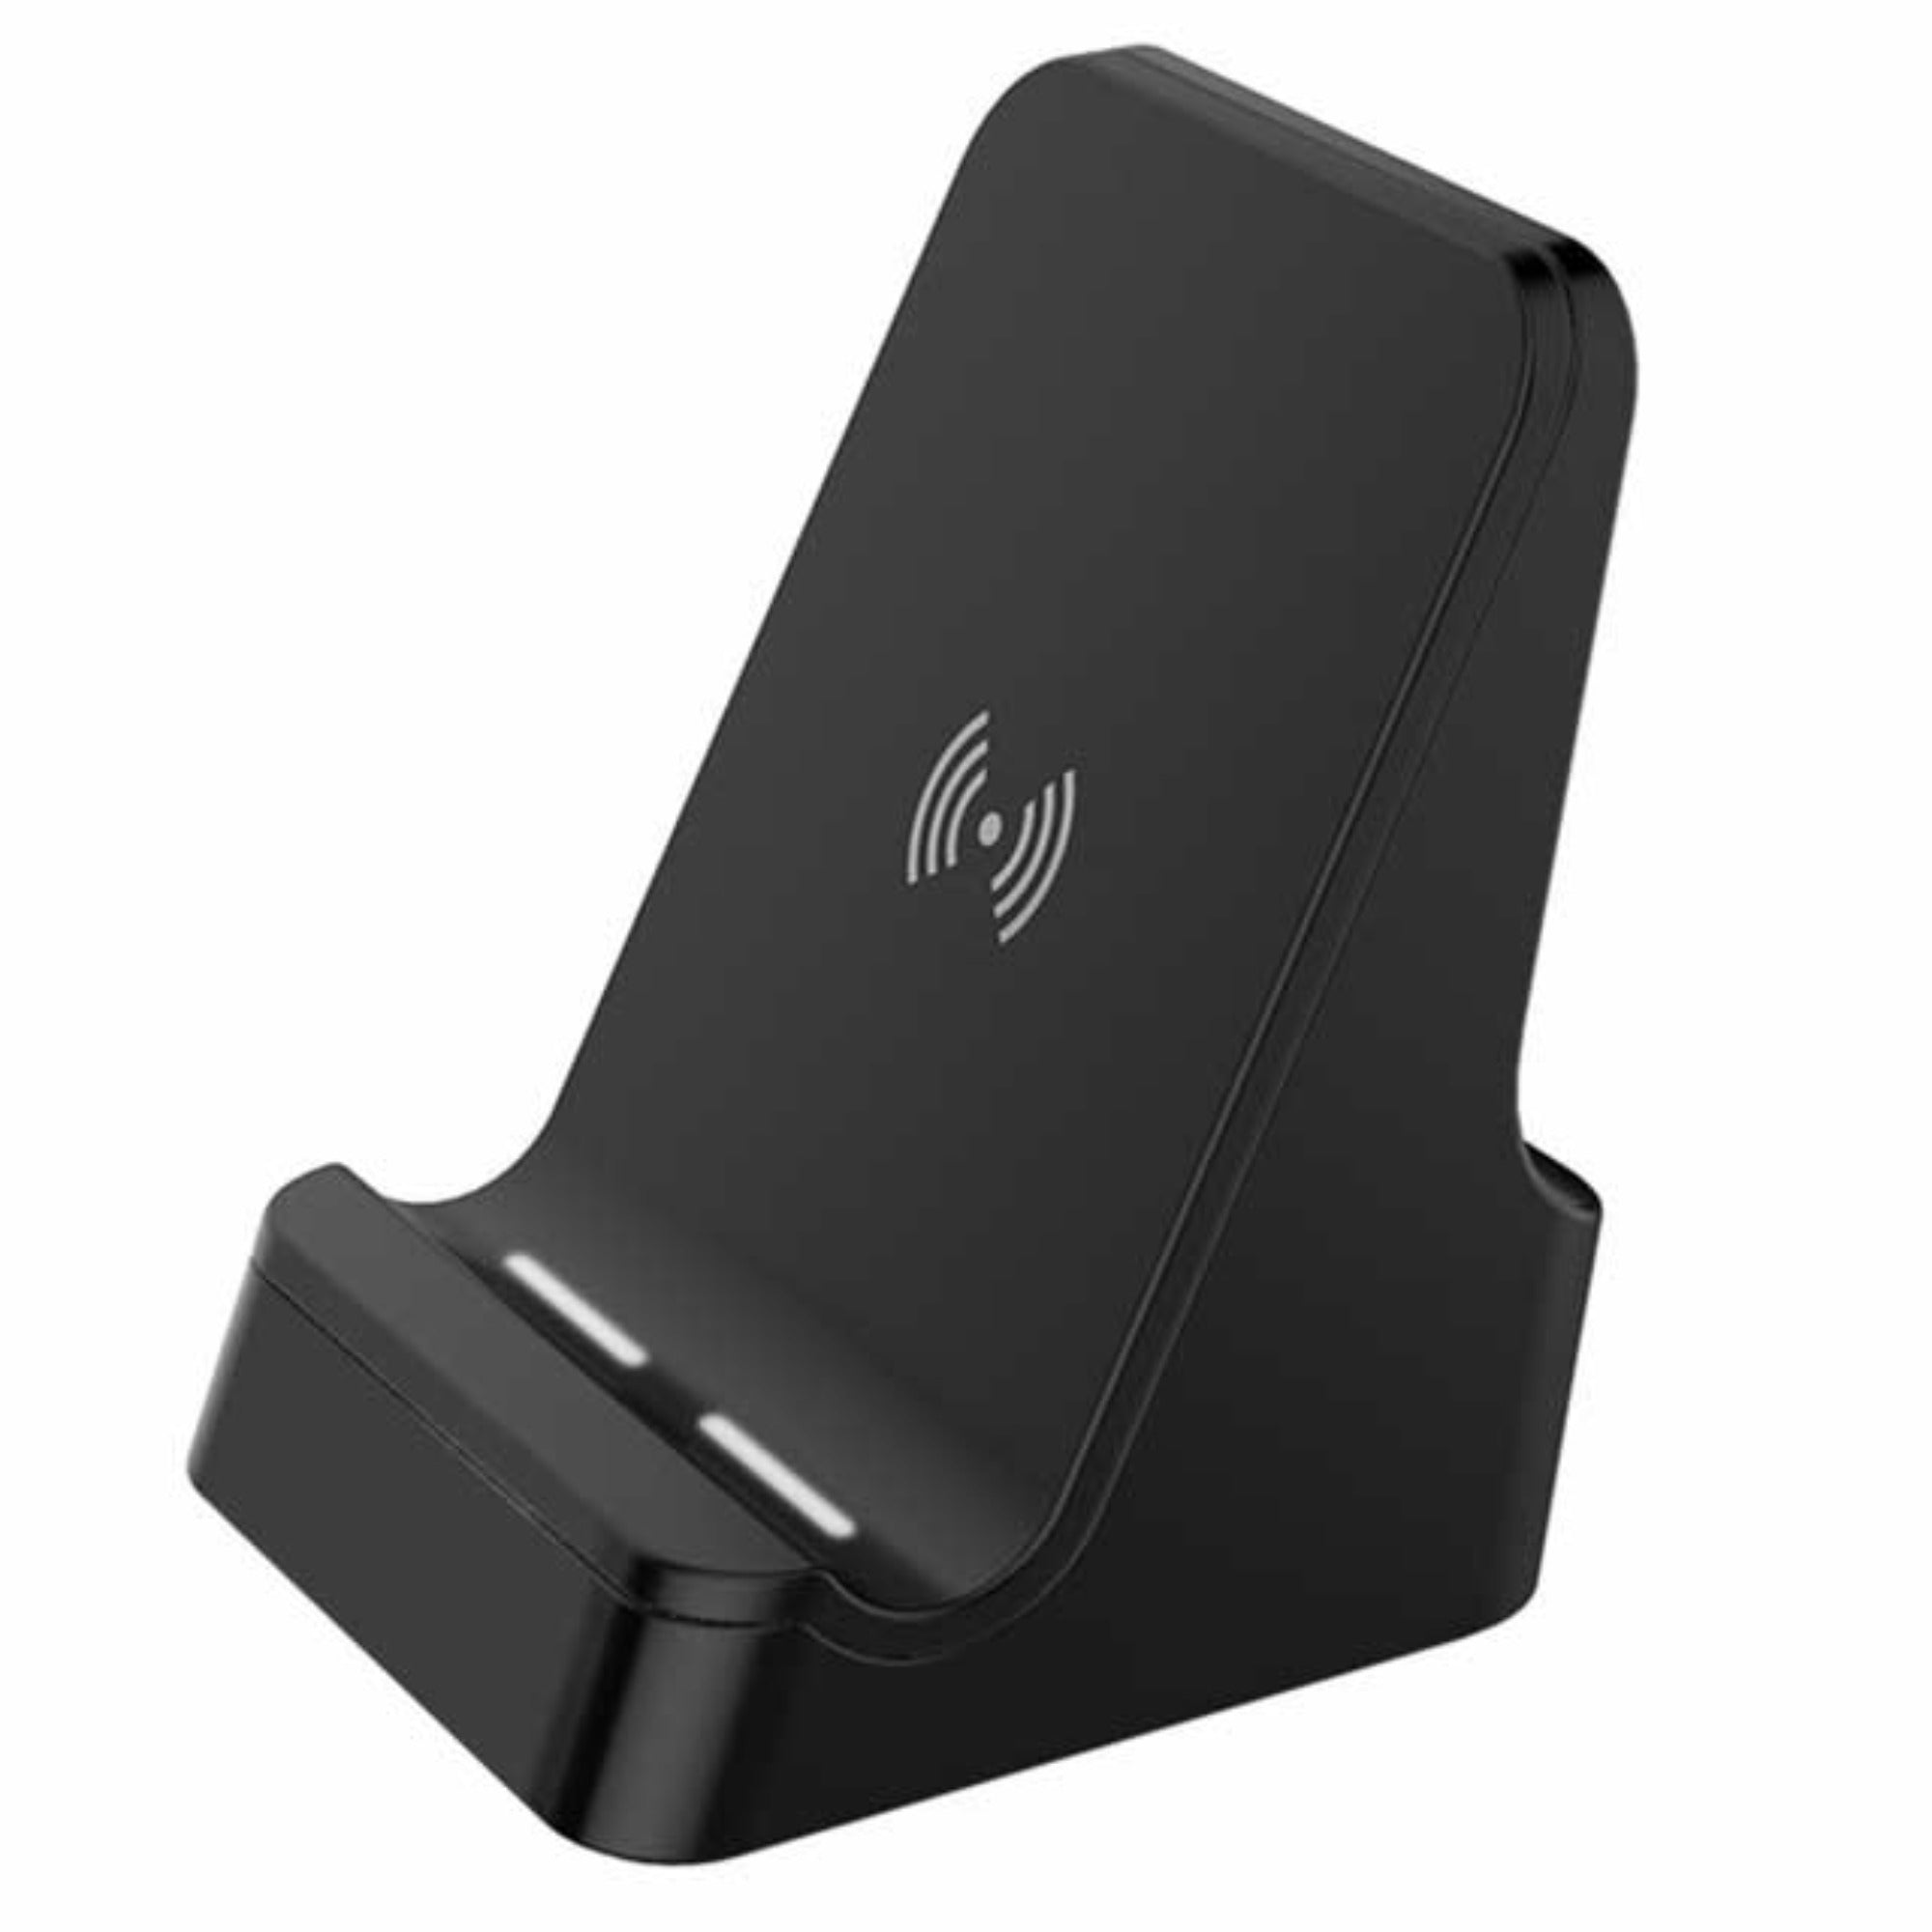 Corinto - @Memorii 5W Wireless Charger With Light Up Logo - Gifto Graphics